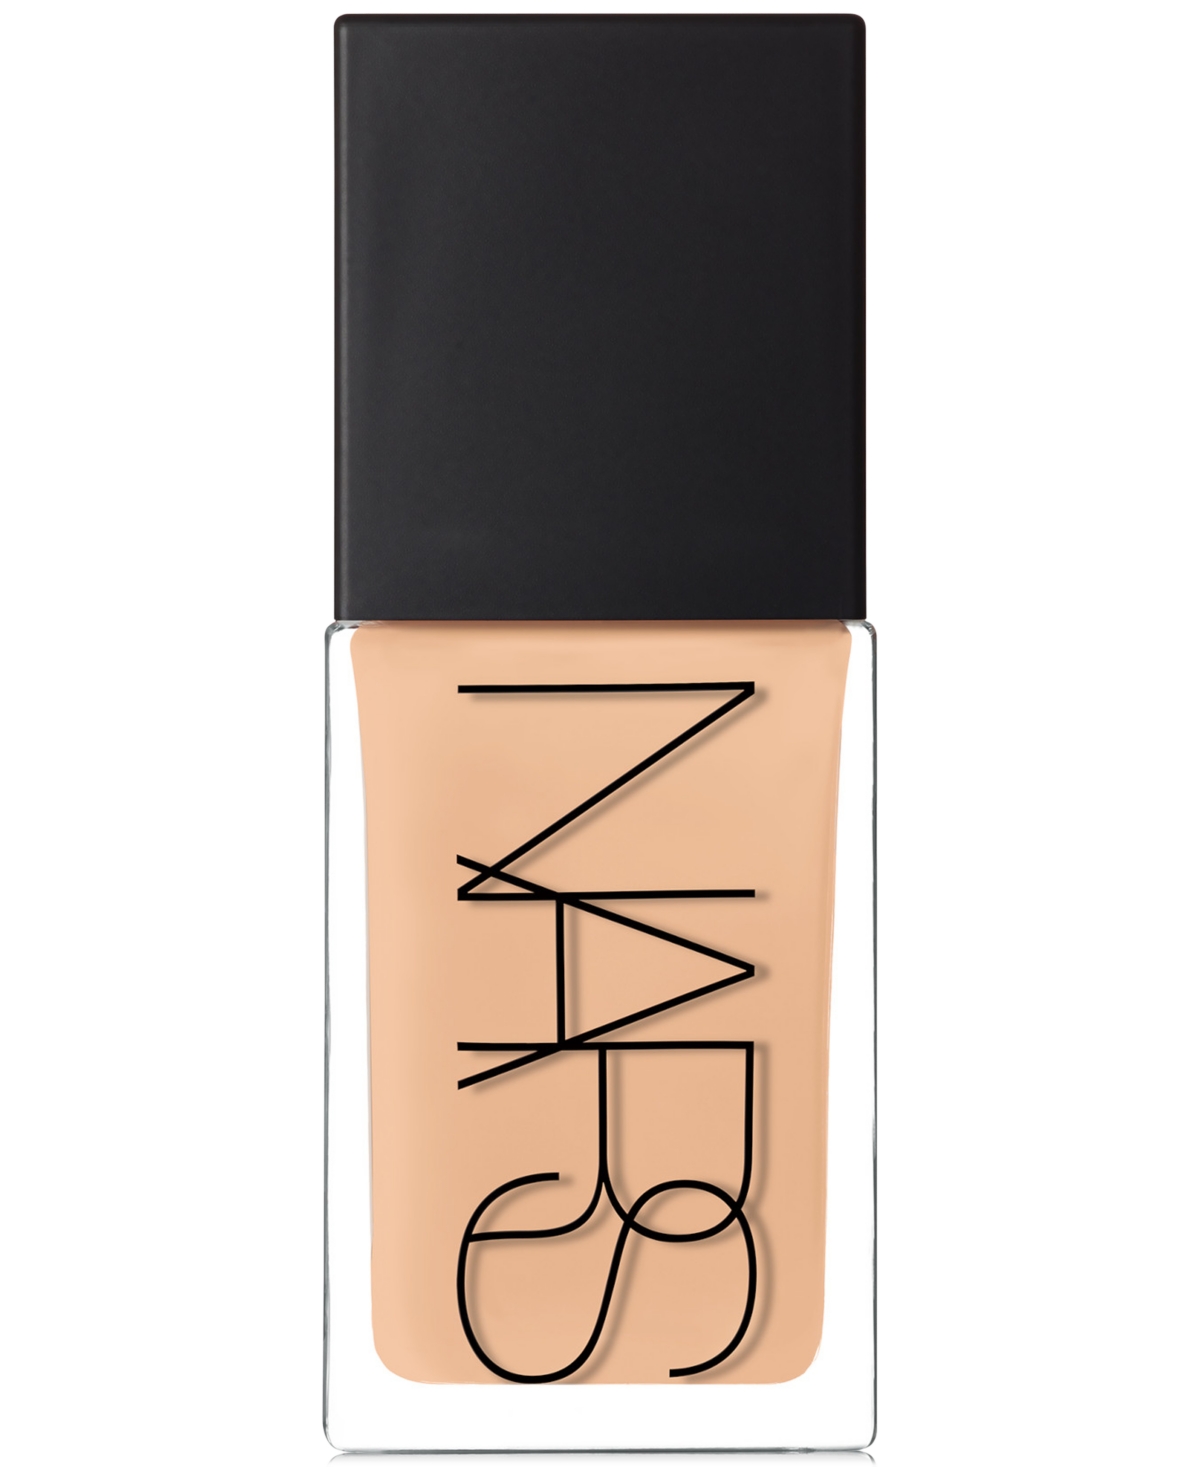 Nars Light Reflecting Foundation In Patagonia (m. - Medium With Neutral Unde